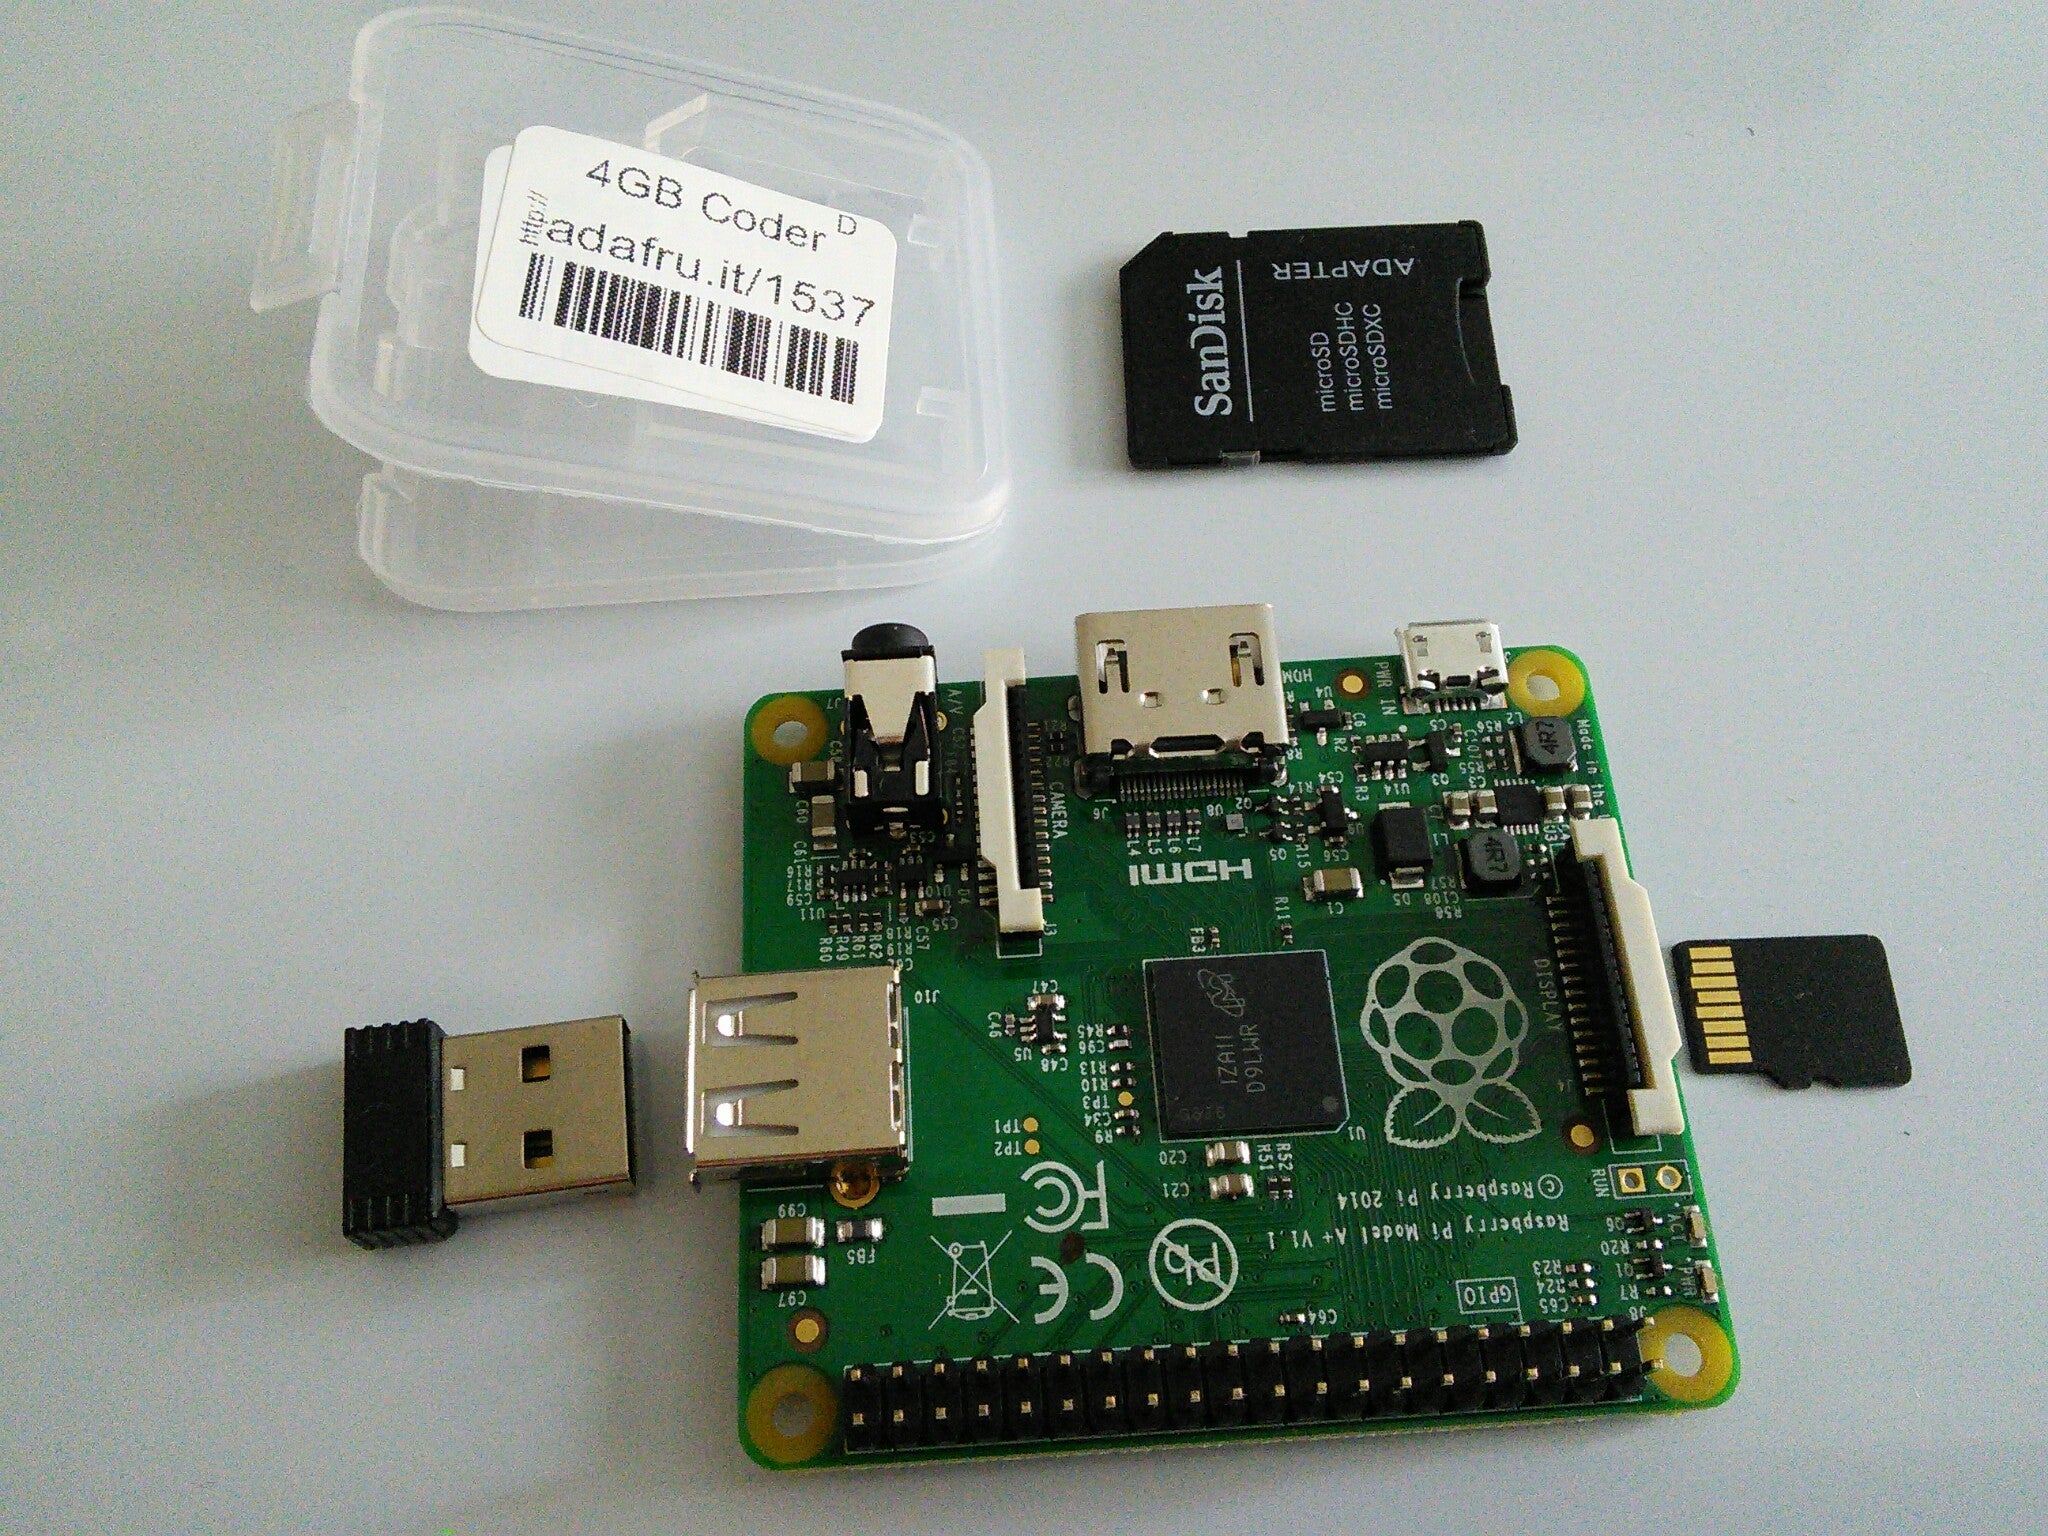 Setting up the Raspberry PI A+ to run Coder